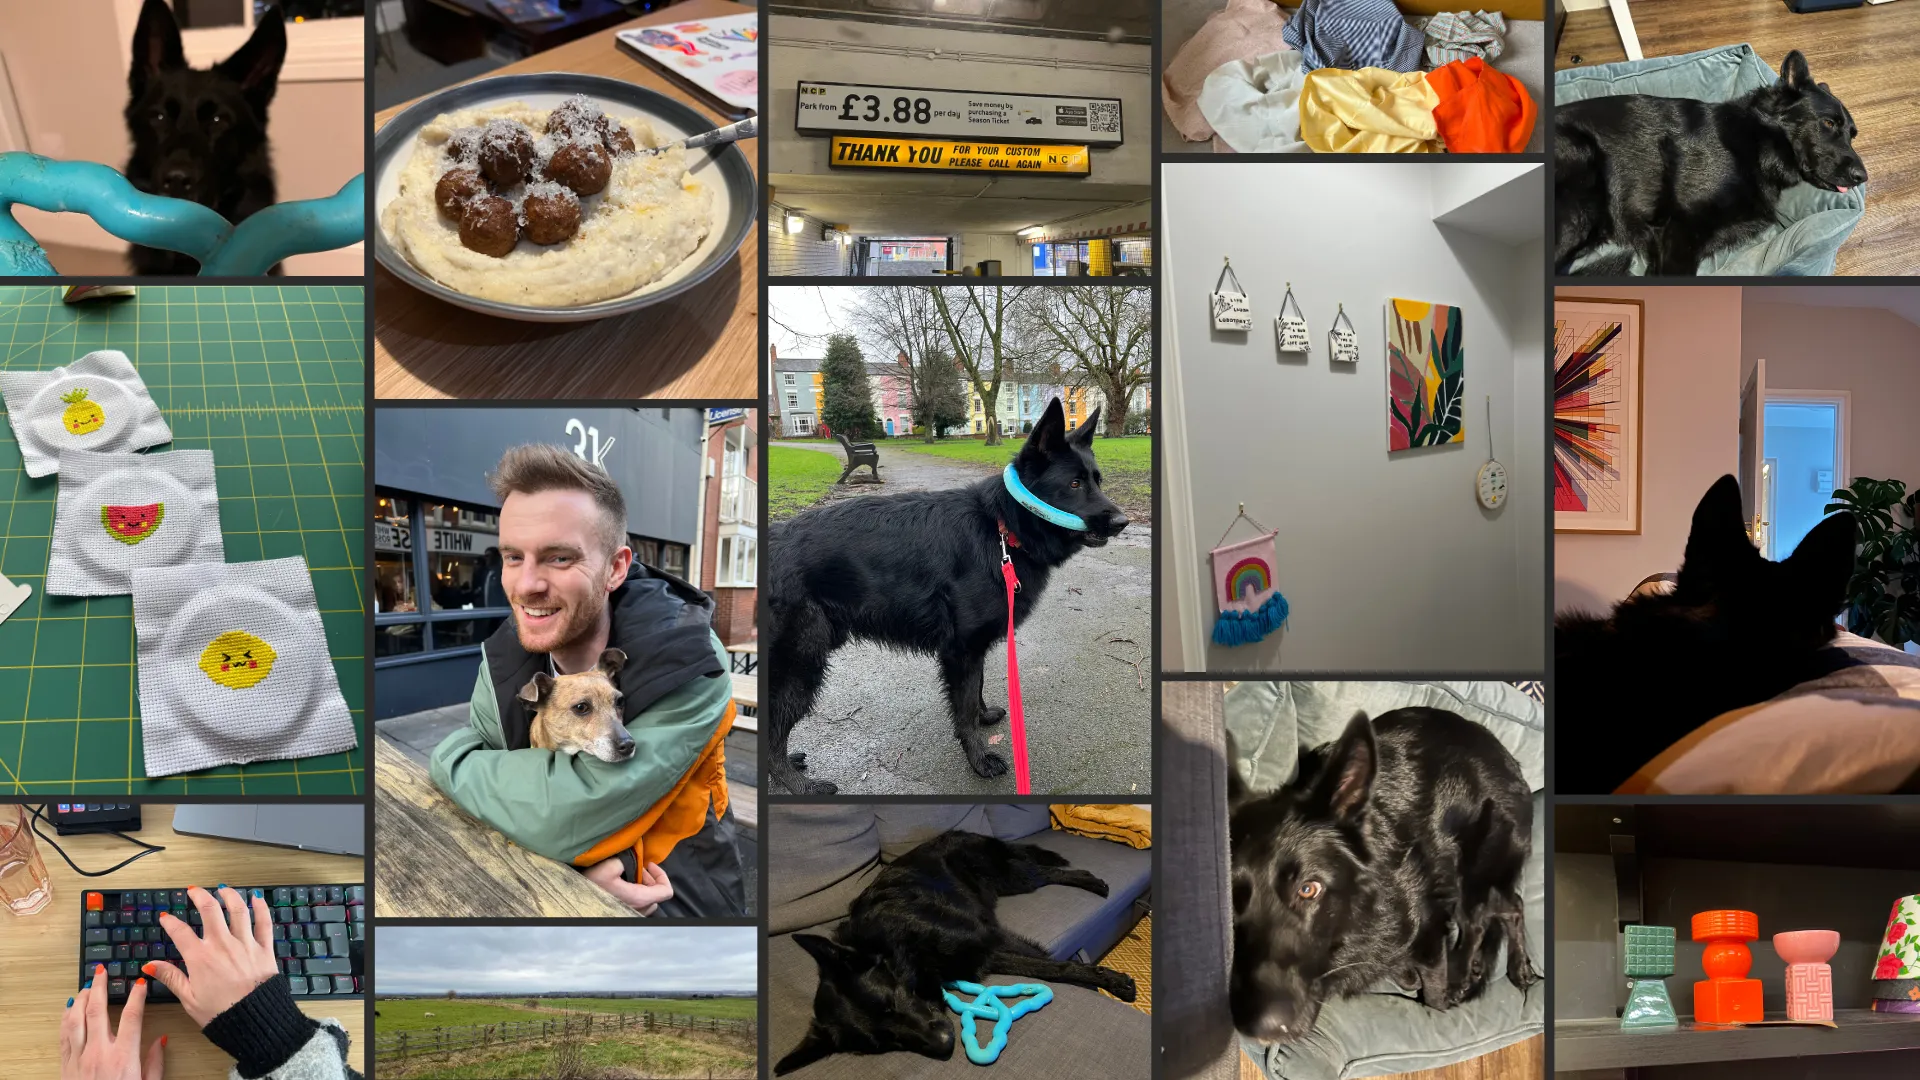 Collage of pictures from February: My dog Juno, a fluffy black German Shepherd, intensely staring at his favourite toy, the blue triangle; a bowl of mashed potatoes with plant balls covered in grated parmesan; a thank you sign in a cool vintage-y font I saw in a car park; a bunch of fabric I got at a vintage shop to practice sewing; Juno cutely asleep on his bed; a few little fruit dudes I cross stiched; my friend Hayden with his dog Jaz in his lap, smiling, Jaz is a very smol Staffie and Chihuahua mix; Juno in my local park, looking goofy with his blue ring toy around his face; my toddler art wall, which a pink sewn banner with a rainbow, a pretty bad painting of some leaves, and some ceramic tiles I decorated a while ago; Juno was poorly so he was allowed a cuddle in bed with me, this pic is him asleep with his head on my legs in bed; me awkwardly pressing a keyboard shortcut, you can see my blue and orange nails, and black keyboard; a landscape picture of a field in Cotgrave Country Park; Juno asleep sprawled on the sofa with the blue triangle next to him; Juno lying on his bed, looking straight up at the camera; some cute colourful geometric candle handlers I saw at a vintage shop, still considering going back for them.